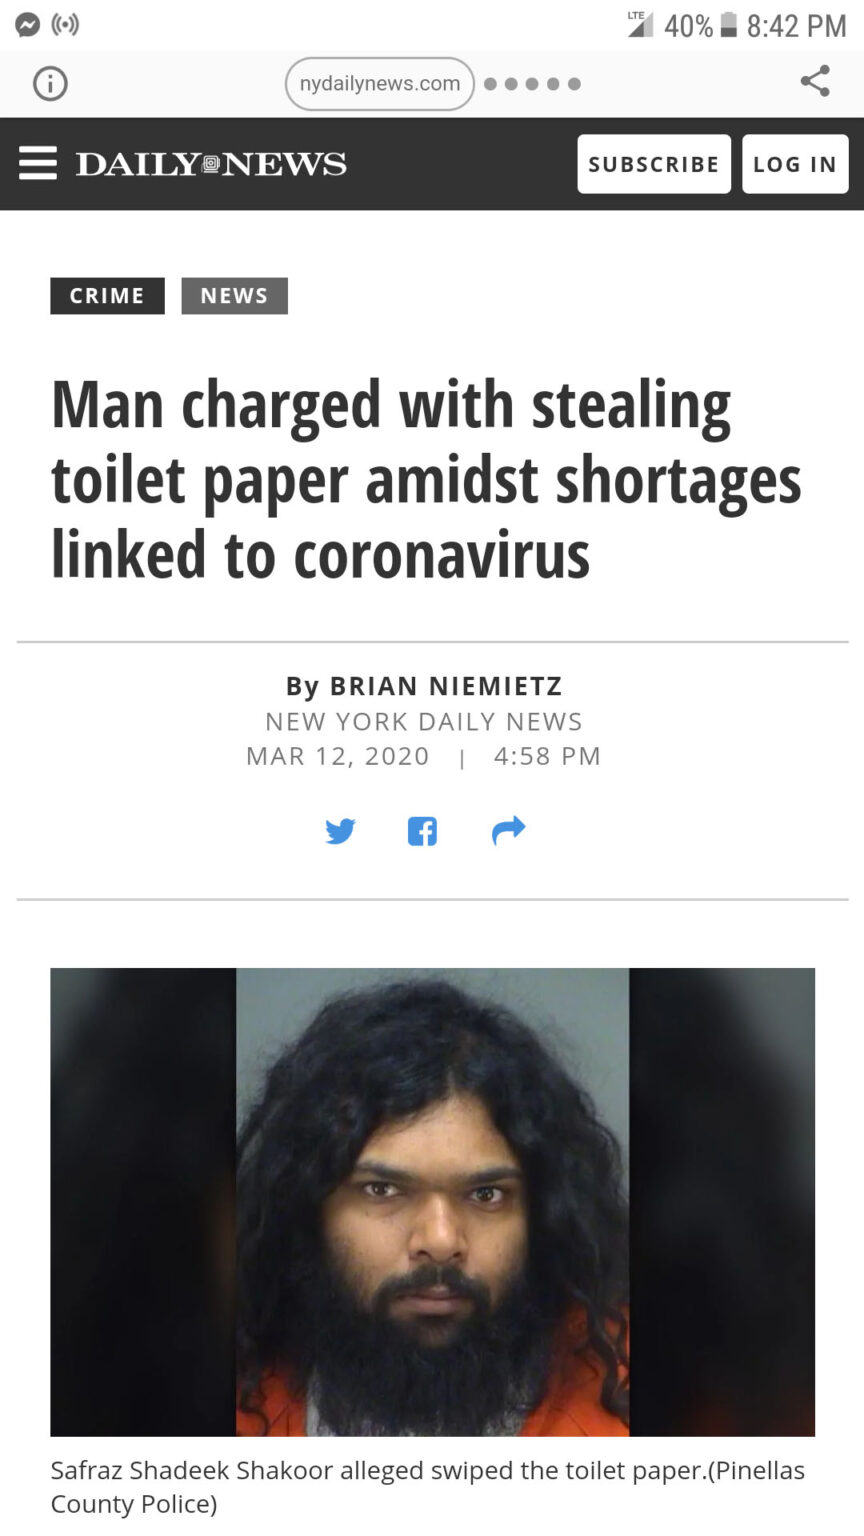 Florida Man is just as crazy as 2020 has been, and if you need any proof, check out these 2020 headlines featuring Florida Man.